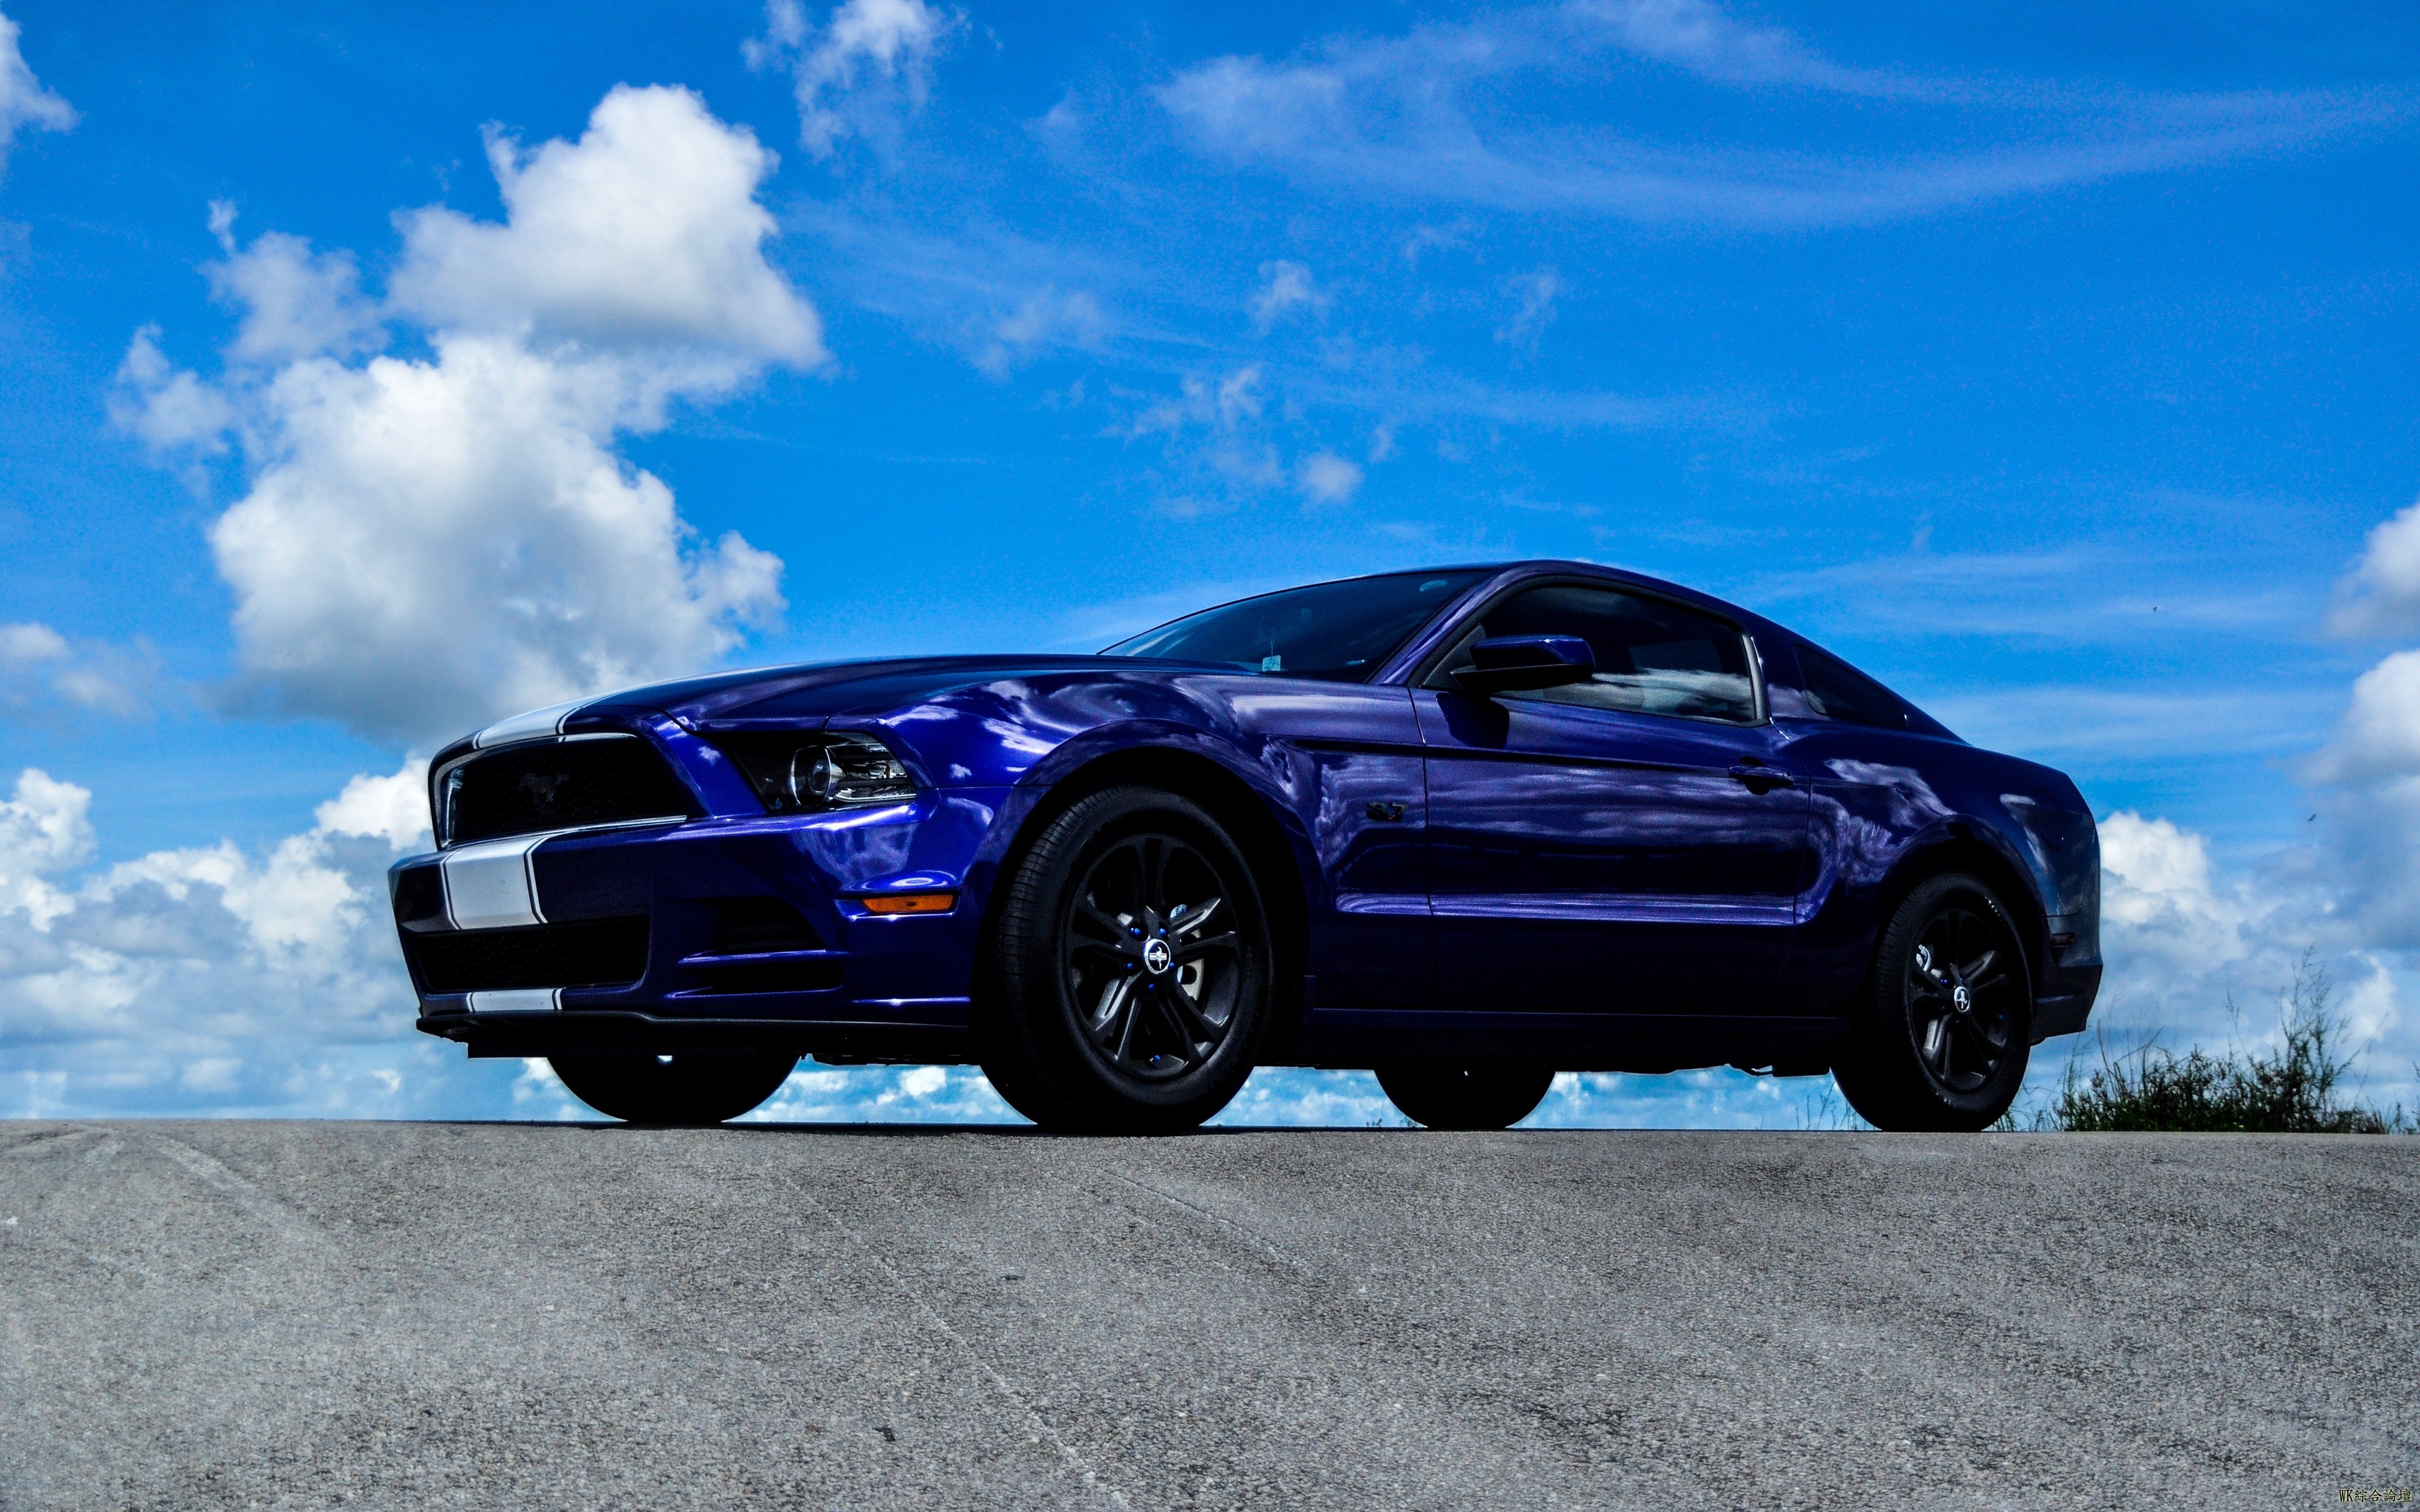 ford_mustang_ford_side_view_112458_3840x2400.jpg